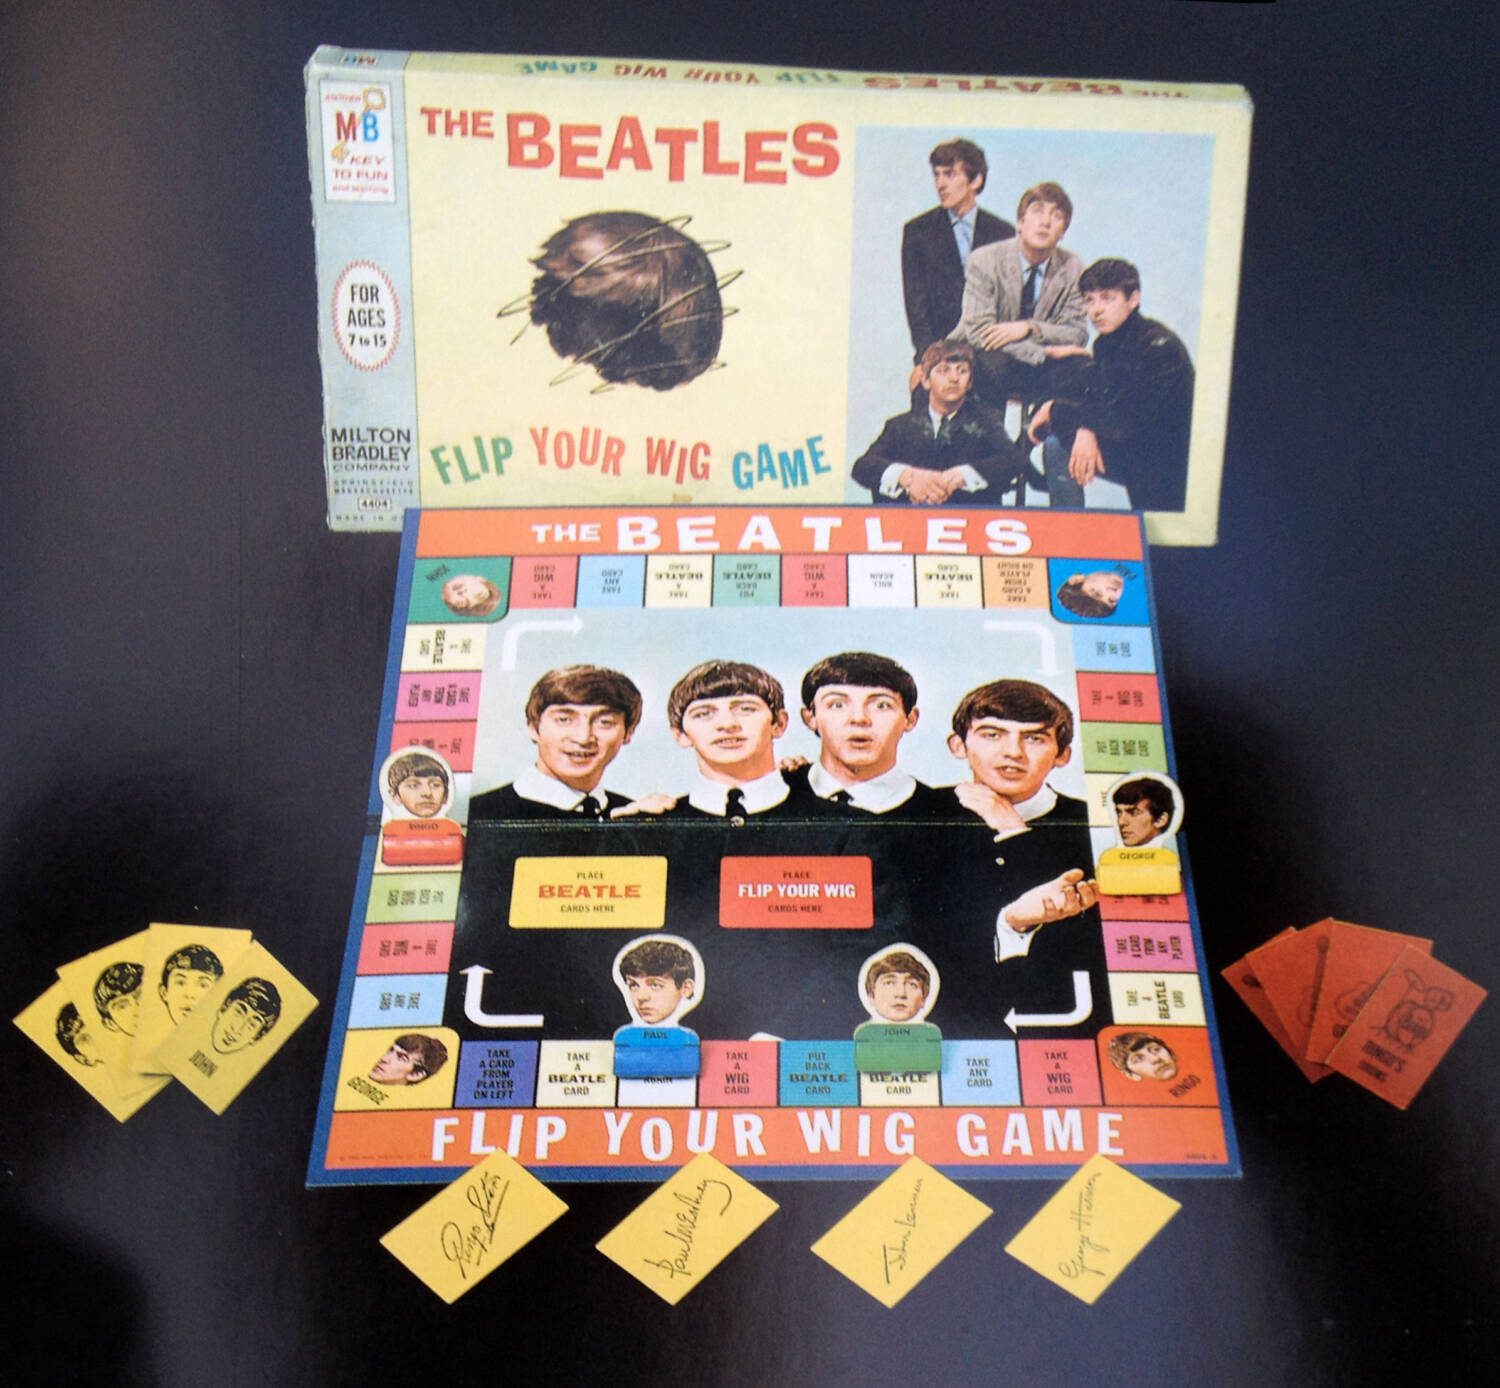 The Beatles Flip Your Wig game was the only licensed Beatles game until 2008's Beatles Monopoly.